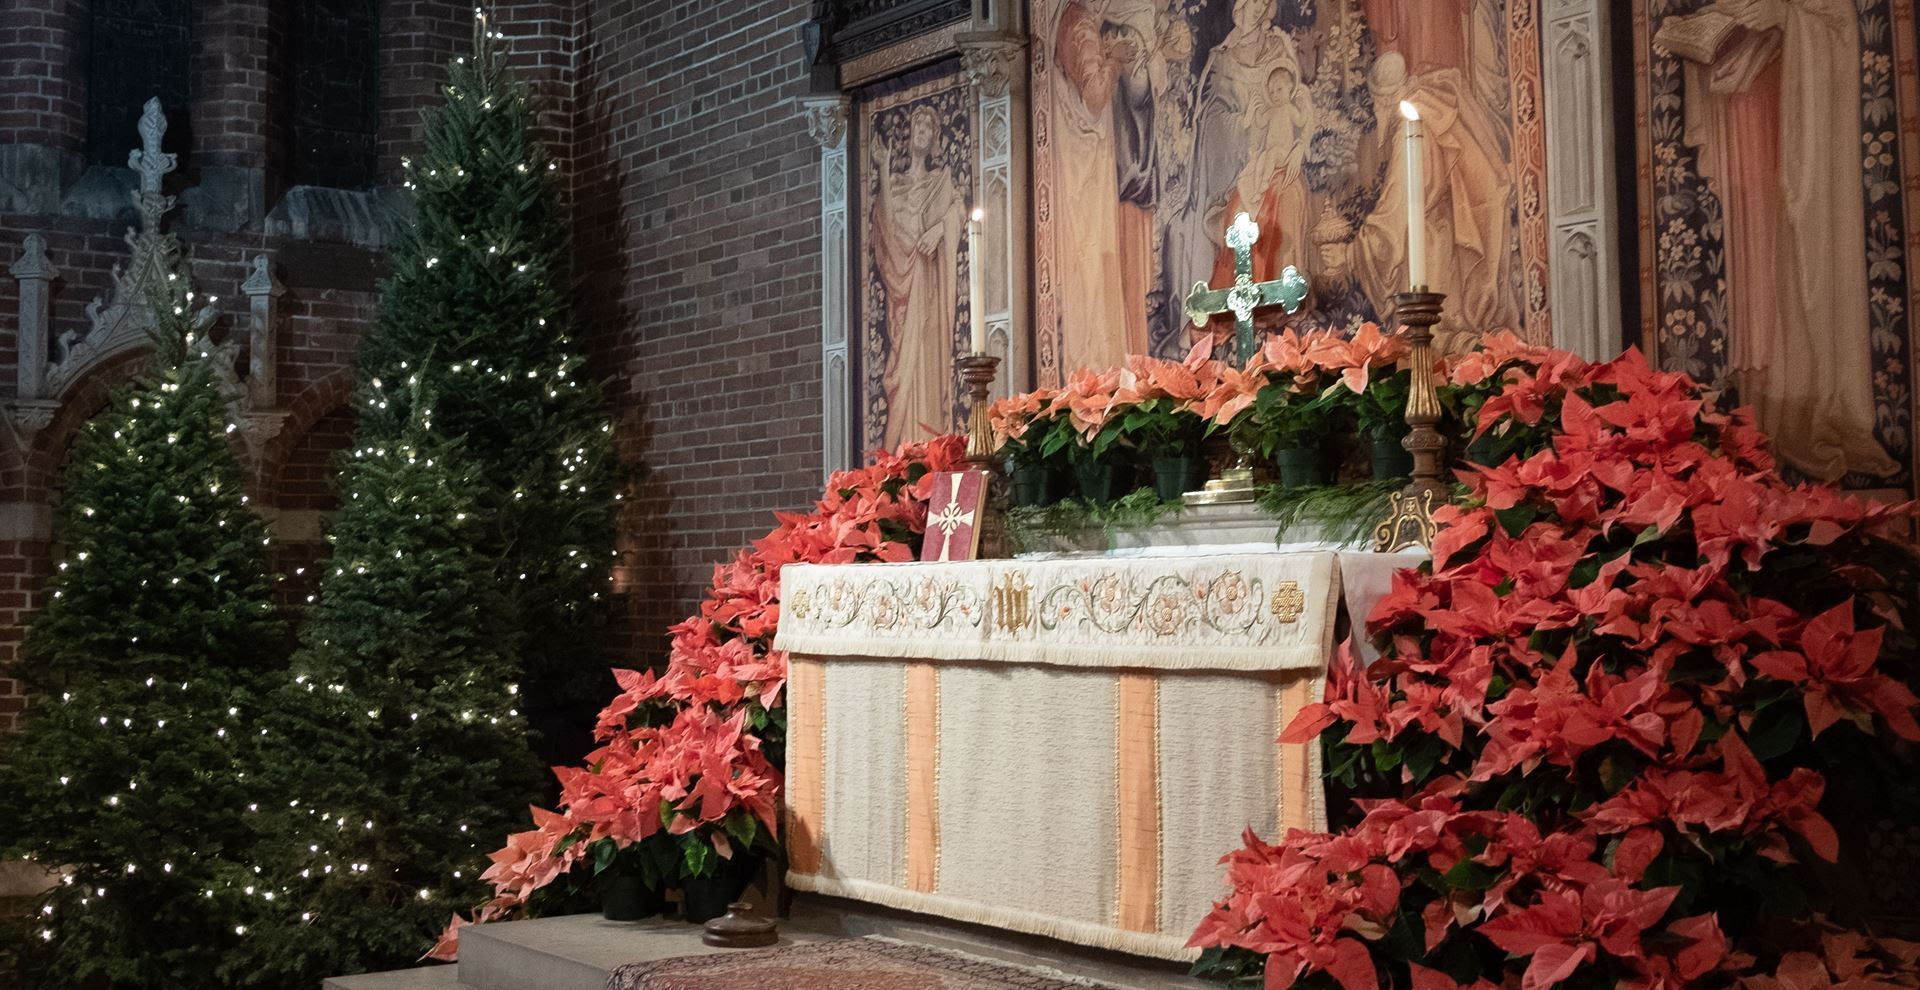 Chancel of Parish of the Epiphany filled with poinsettias and Christmas greens